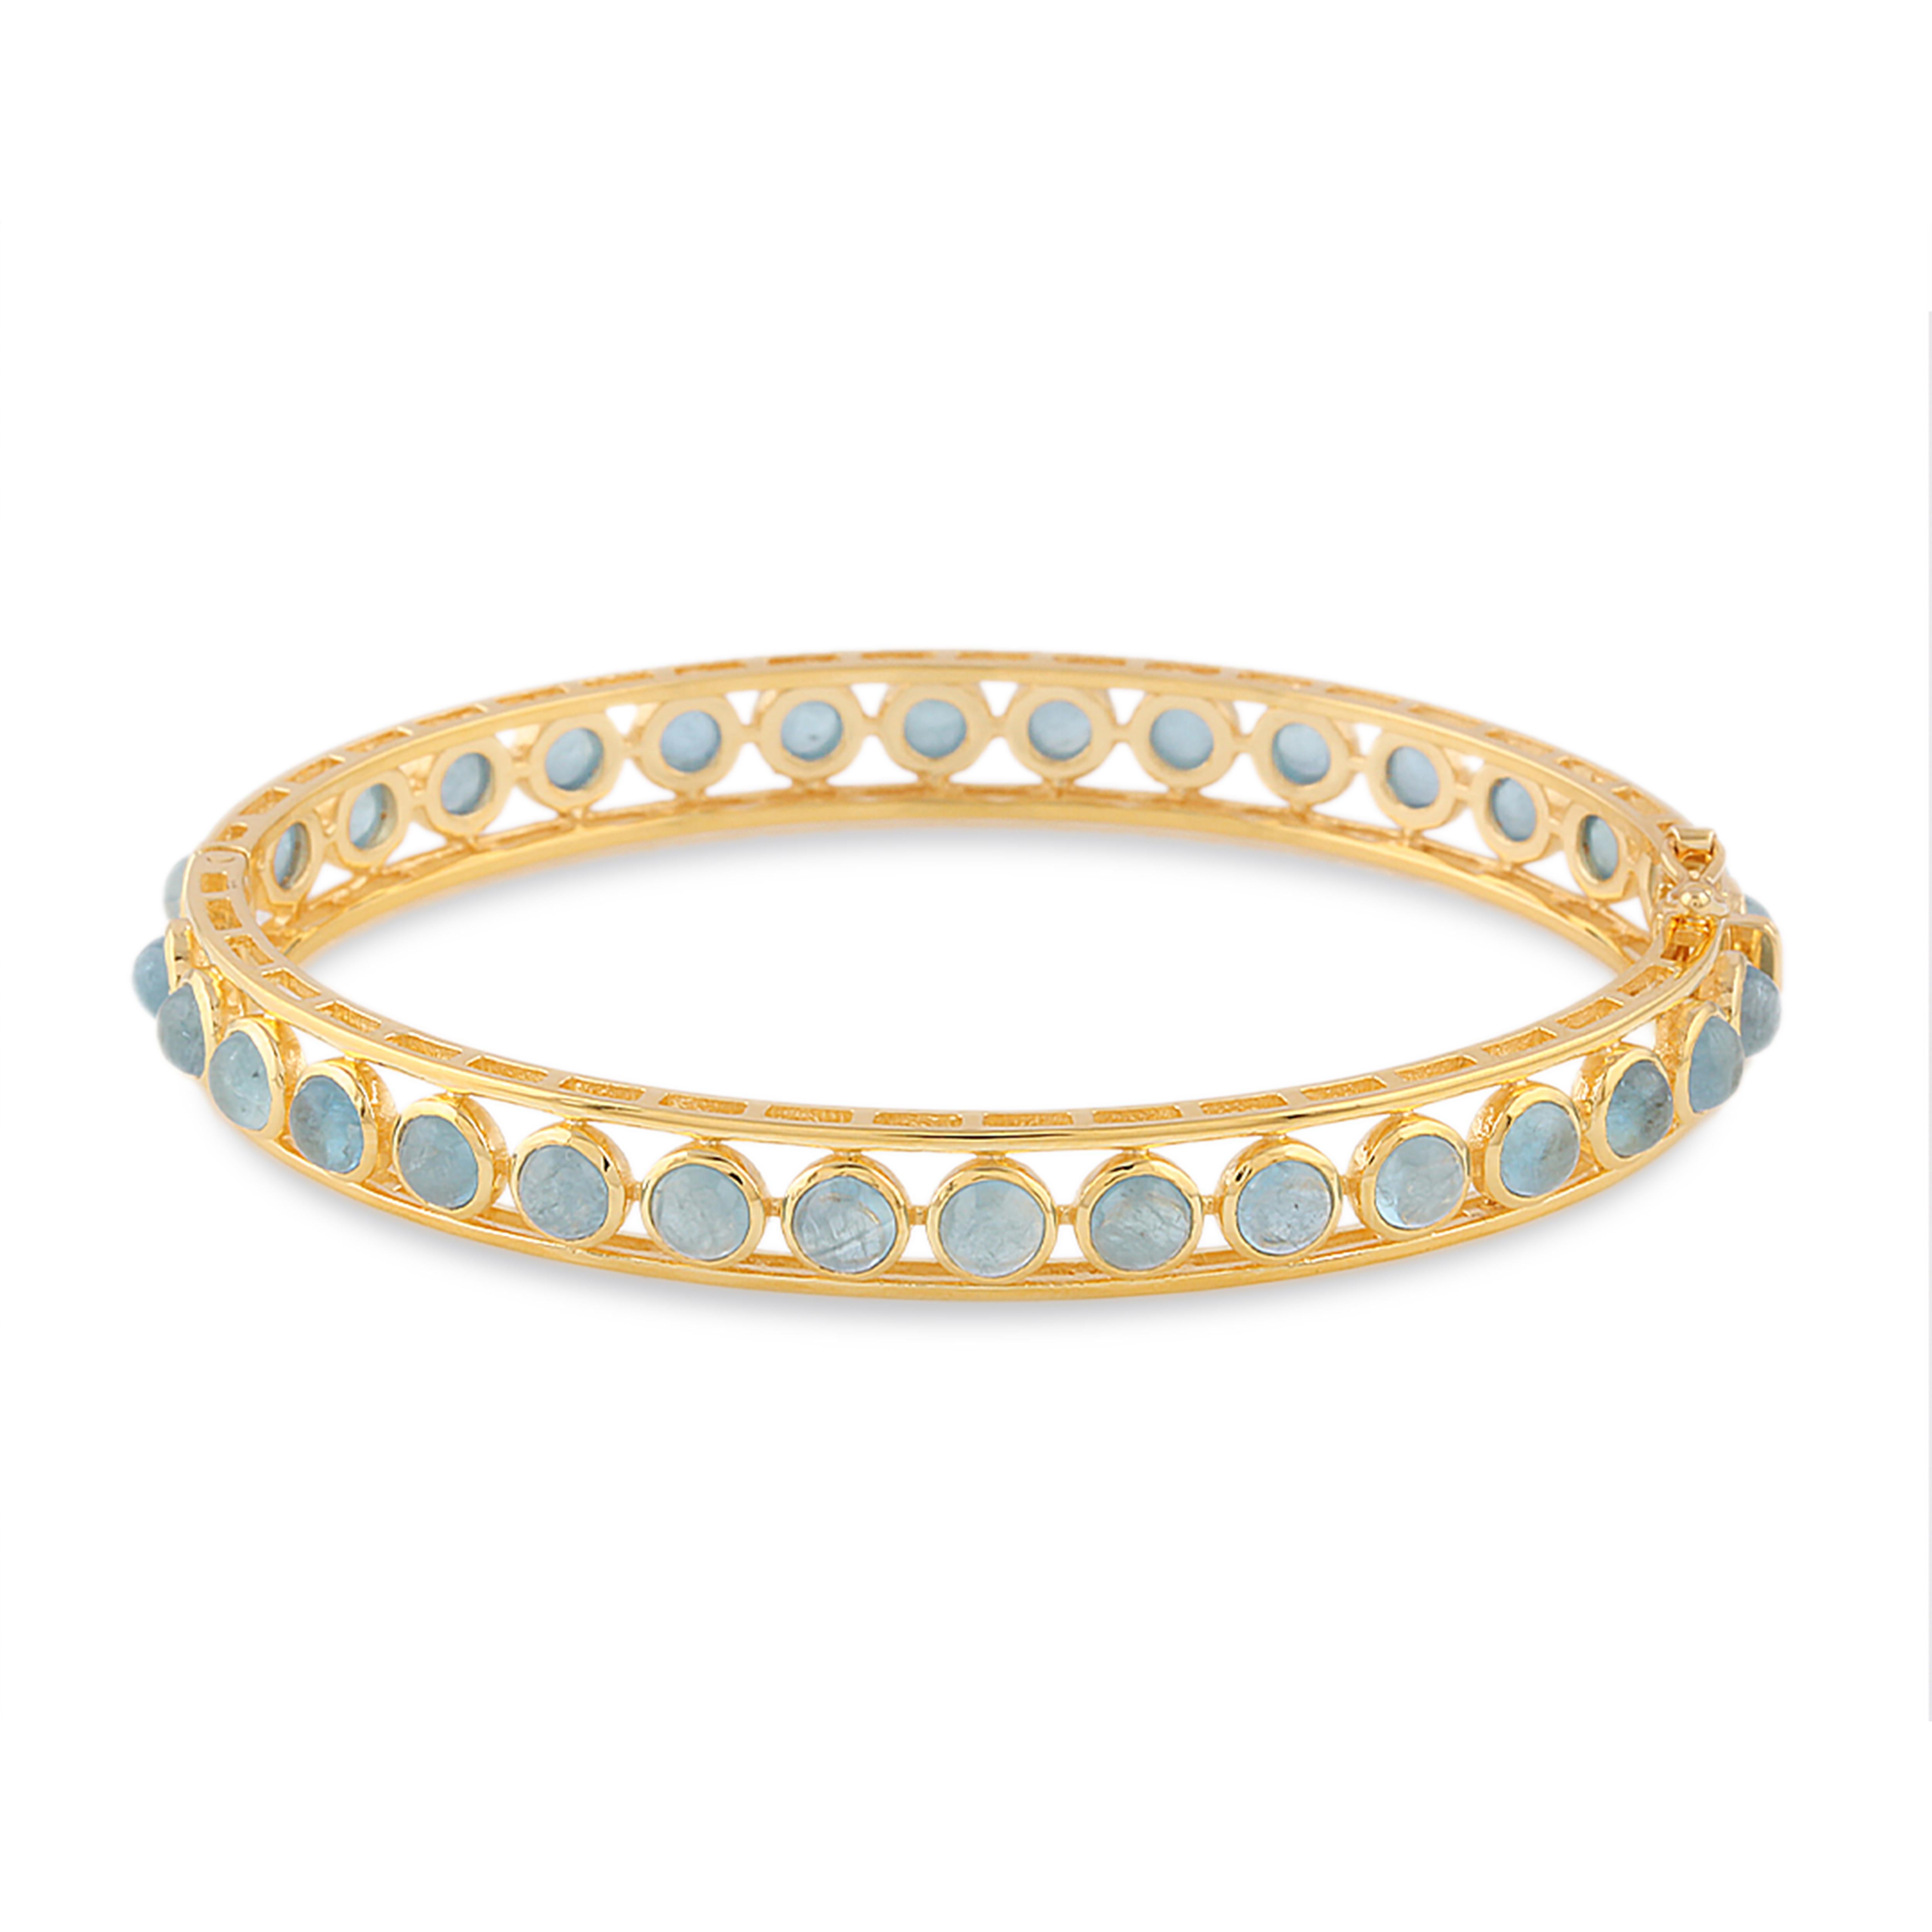 Tresor Aquamarine Bangle features 7.00 cts Aquamarine in 18k yellow gold. The Bracelet are an ode to the luxurious yet classic beauty with sparkly diamonds. Their contemporary and modern design makes them versatile in their use. The Bracelet are